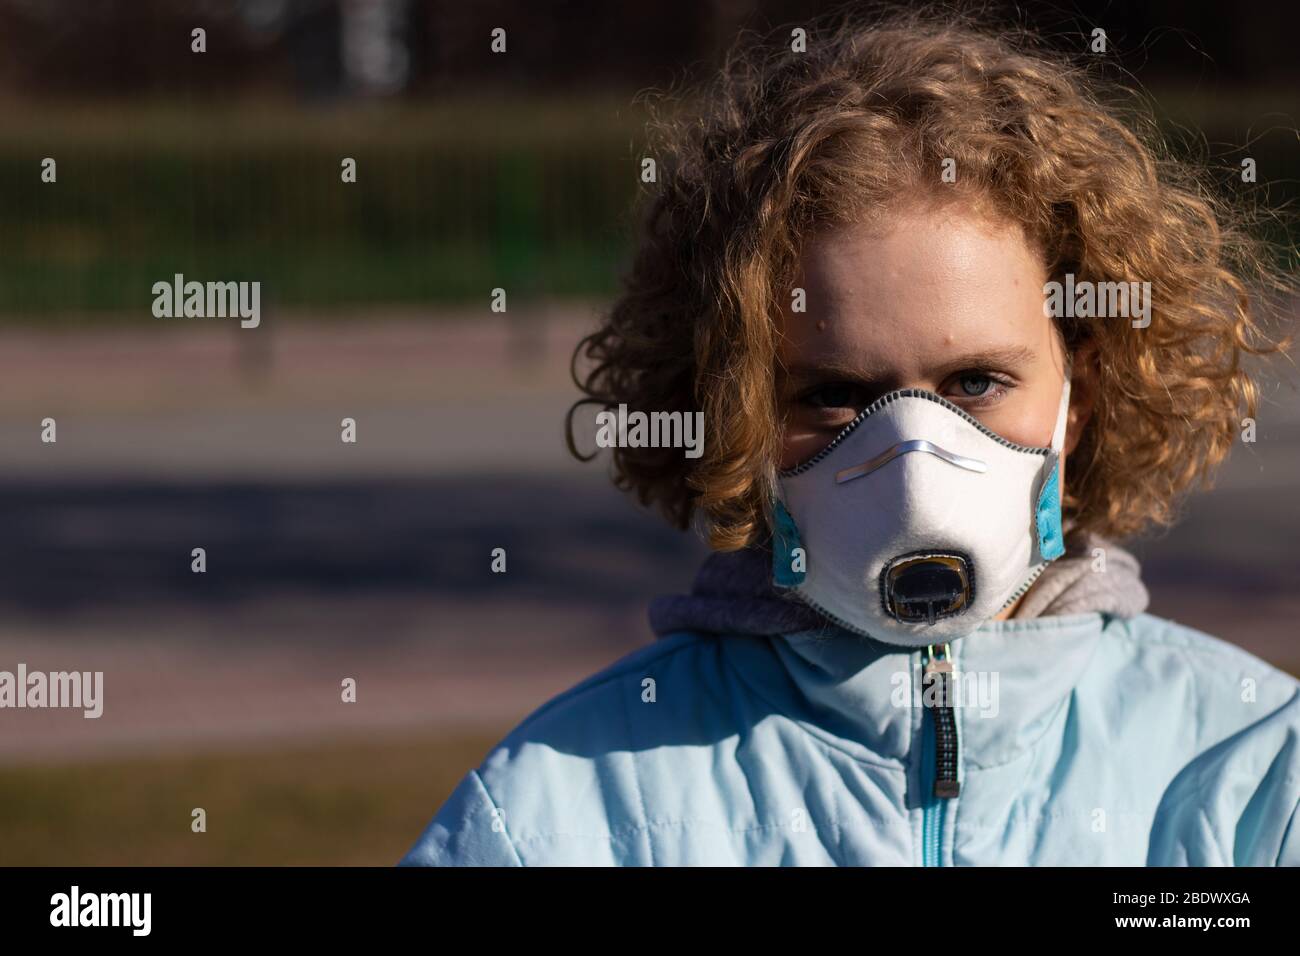 Beautiful young girl with a serious face looks at the camera. The concept of environmental issues and pollution. Copy space on blurry background Stock Photo